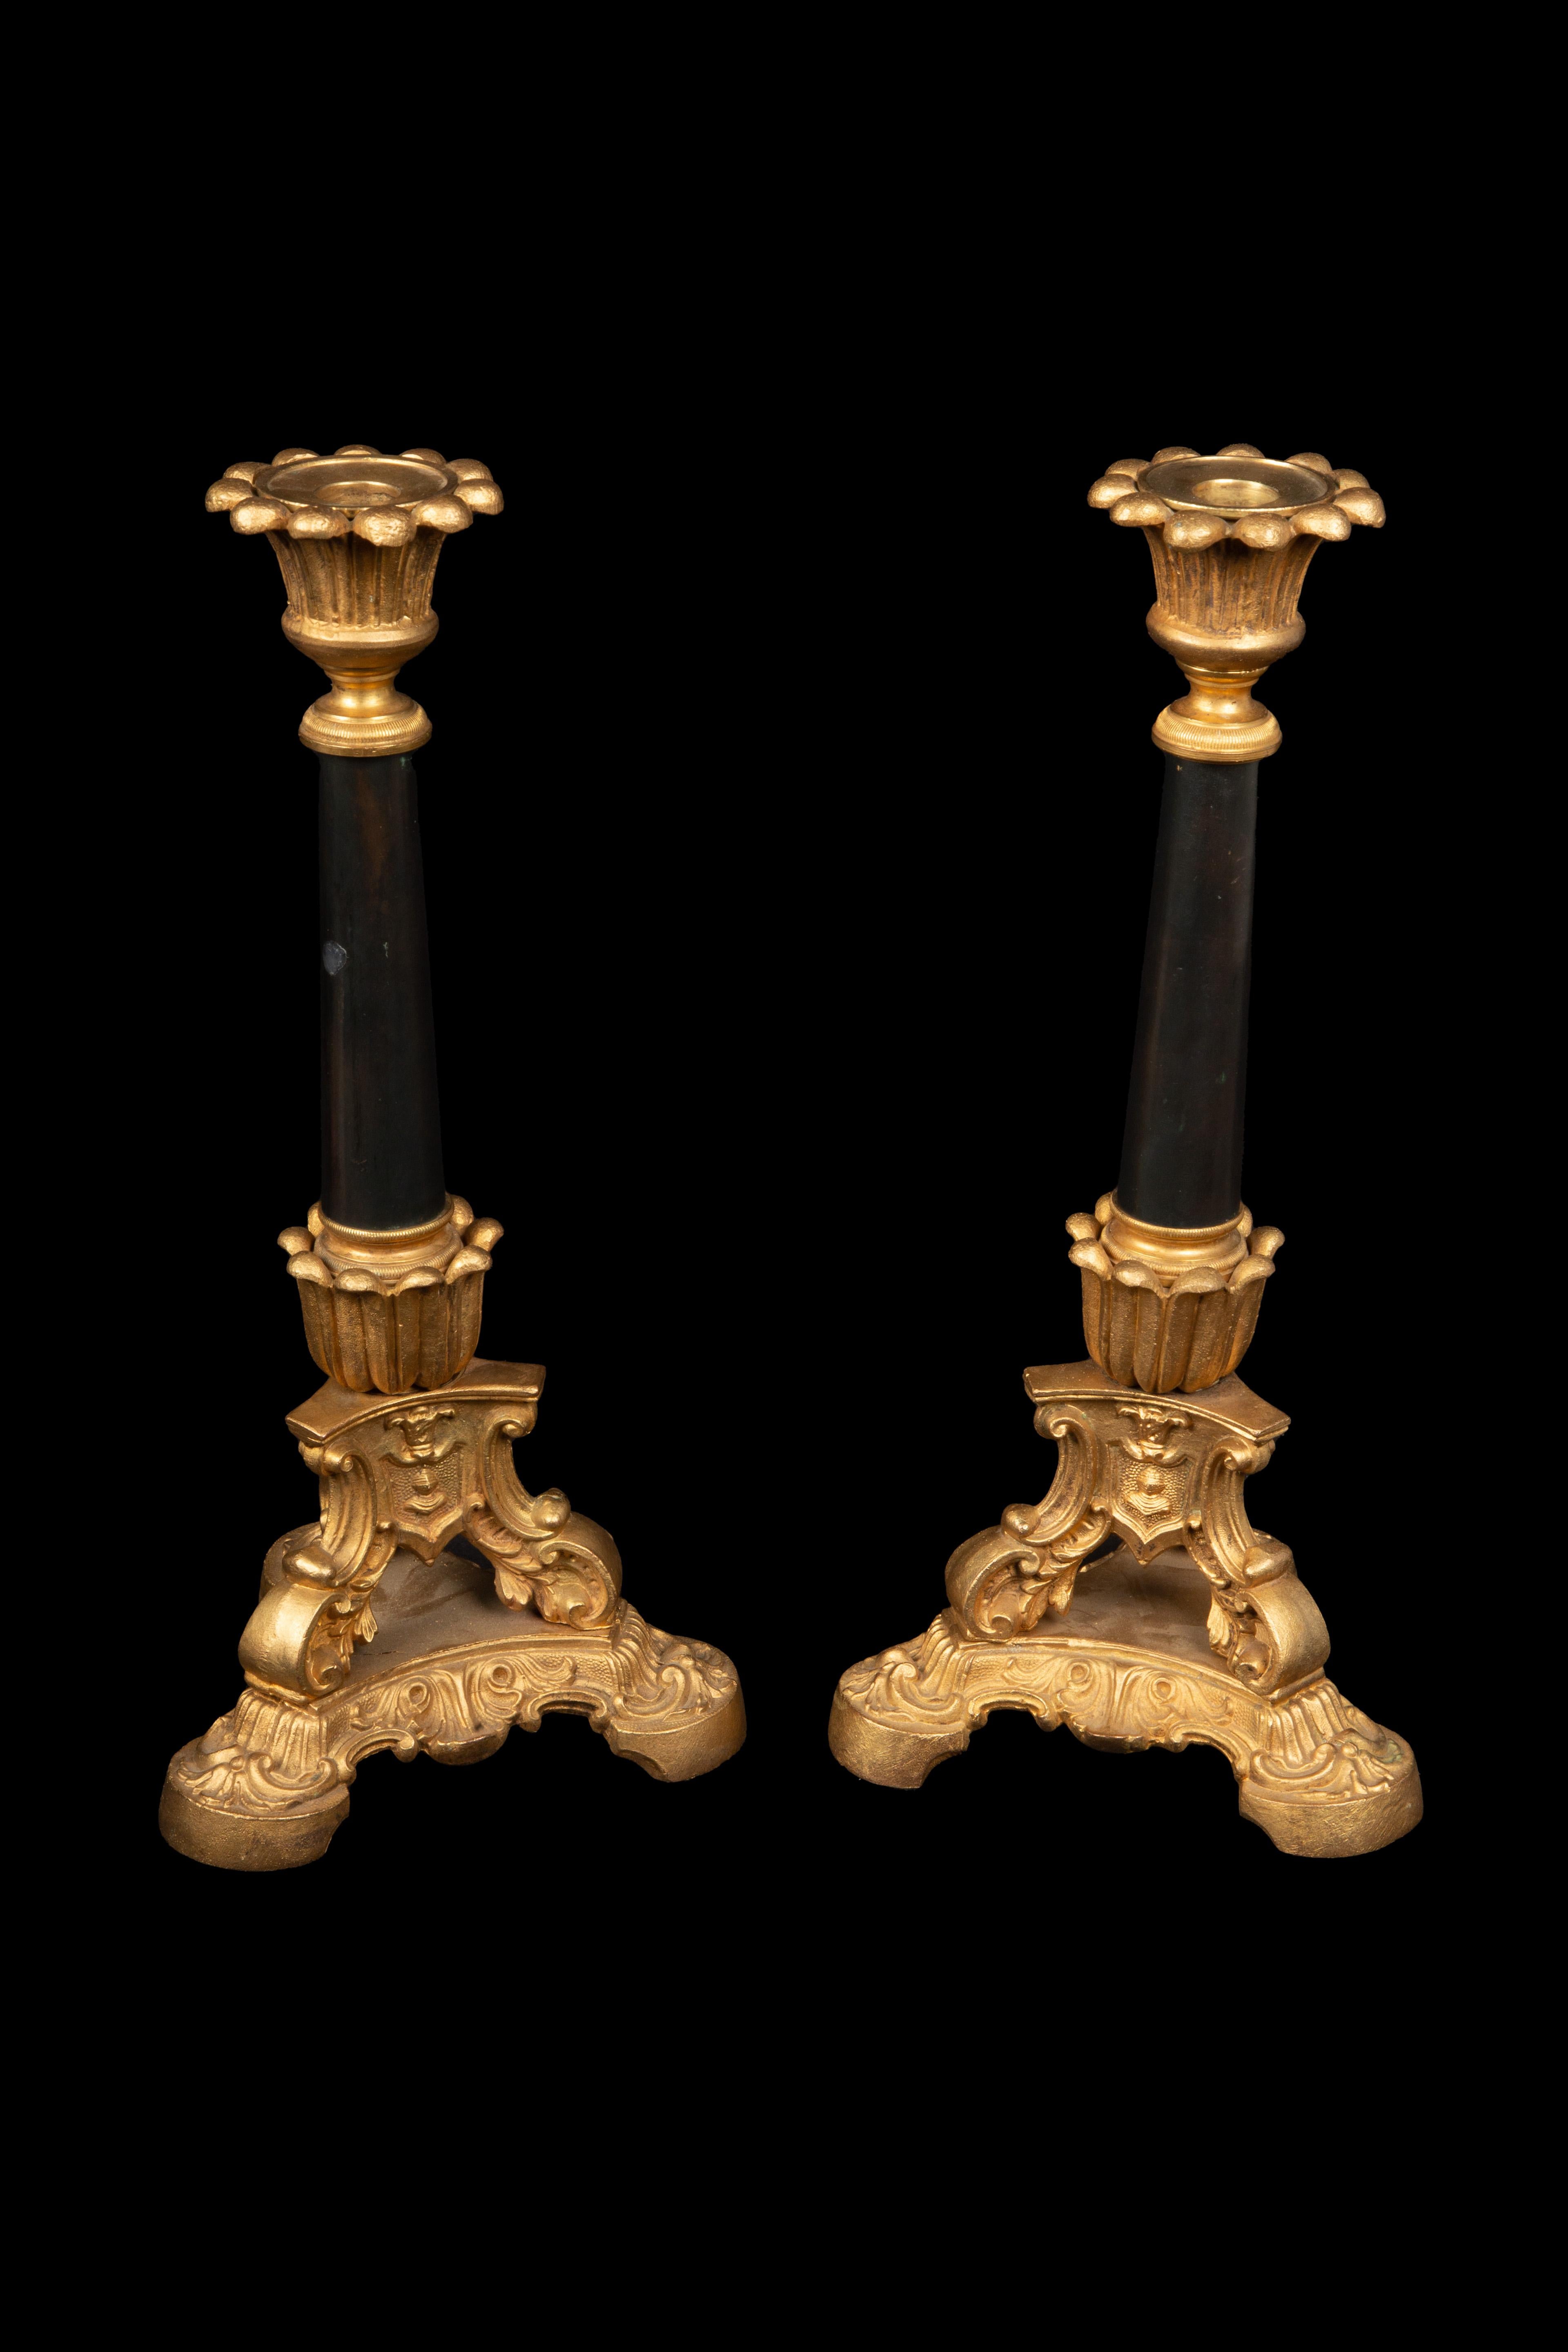 Napoleon III 19th Century Gilt and Black Patinated Candle Sticks For Sale